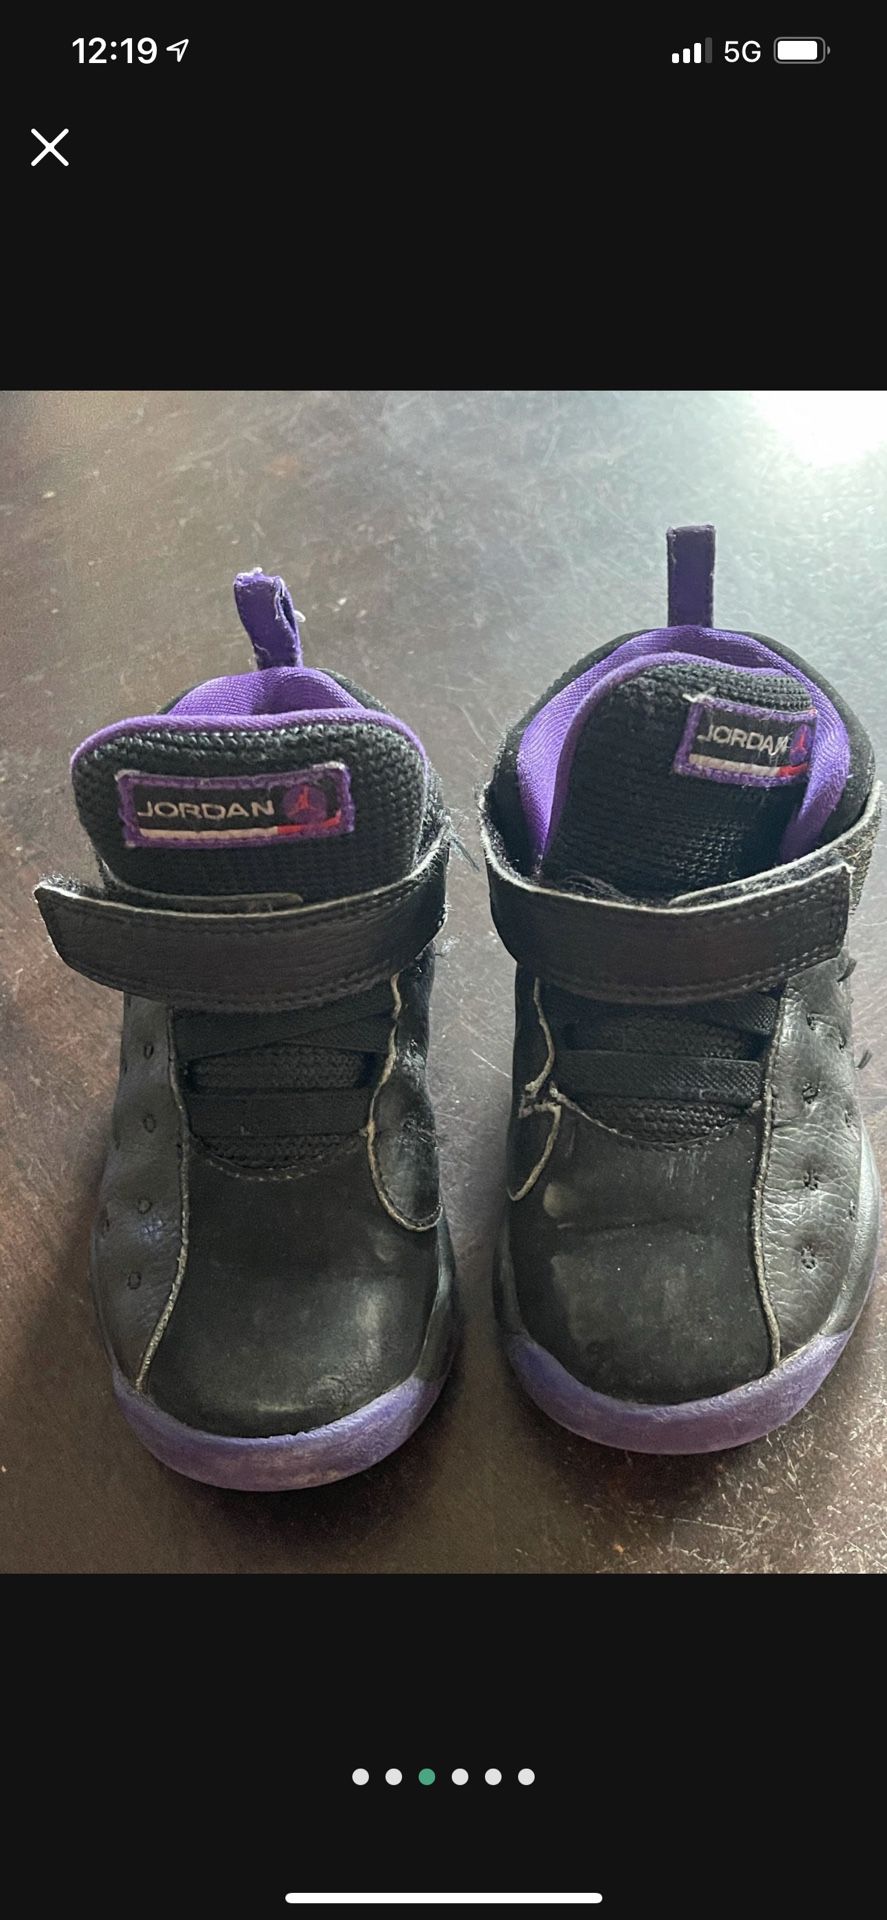 Four Pair Of Baby Shoes Size 0-3 Months for Sale in The Bronx, NY - OfferUp